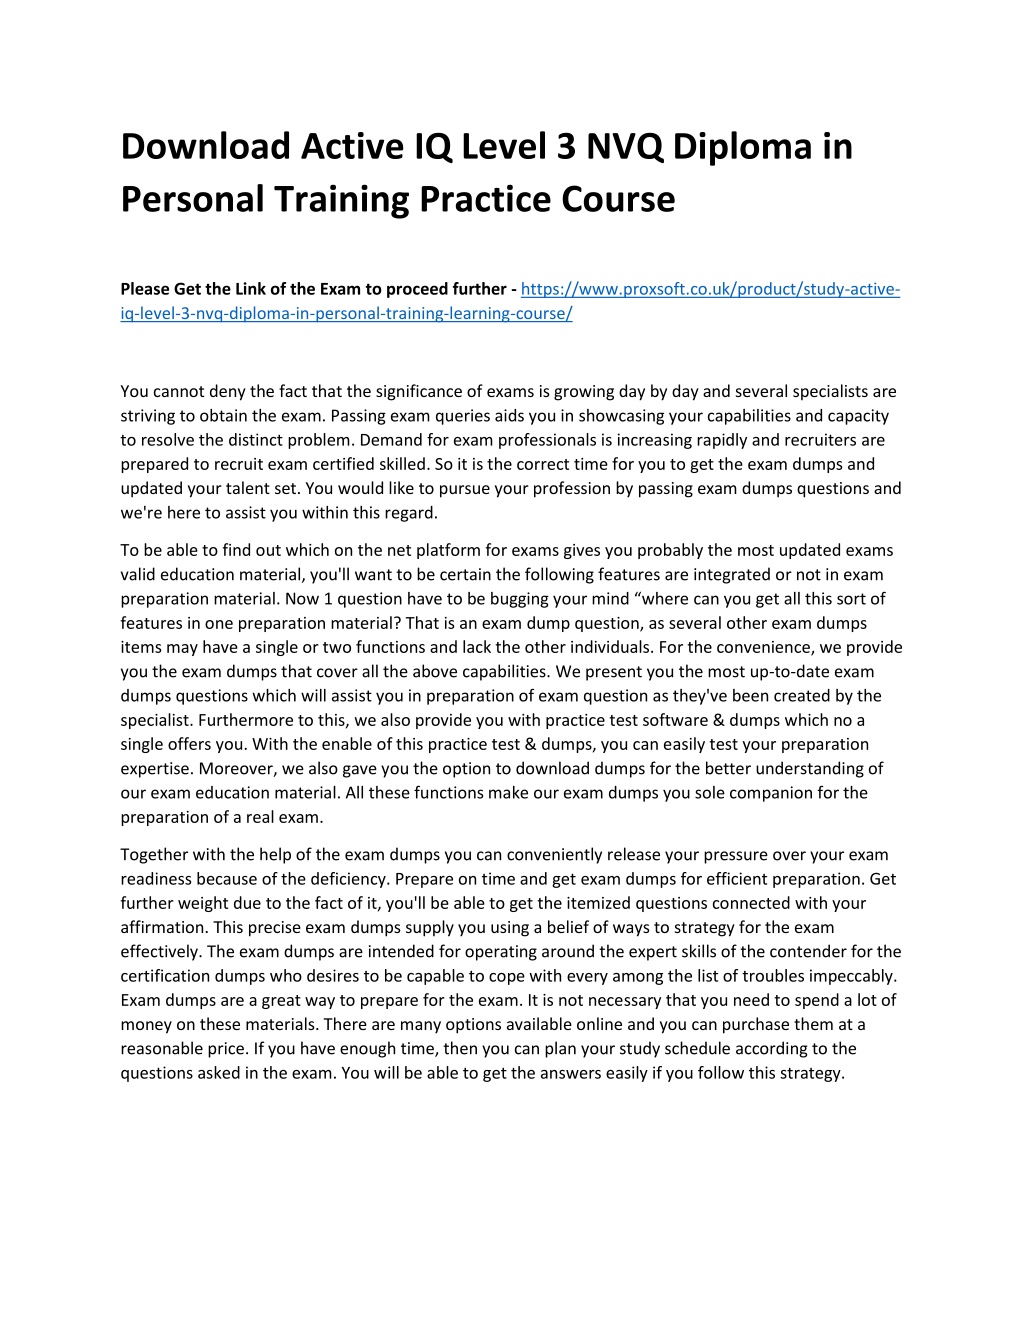 Ppt Download Active Iq Level 3 Nvq Diploma In Personal Training Practice Course Powerpoint 6541